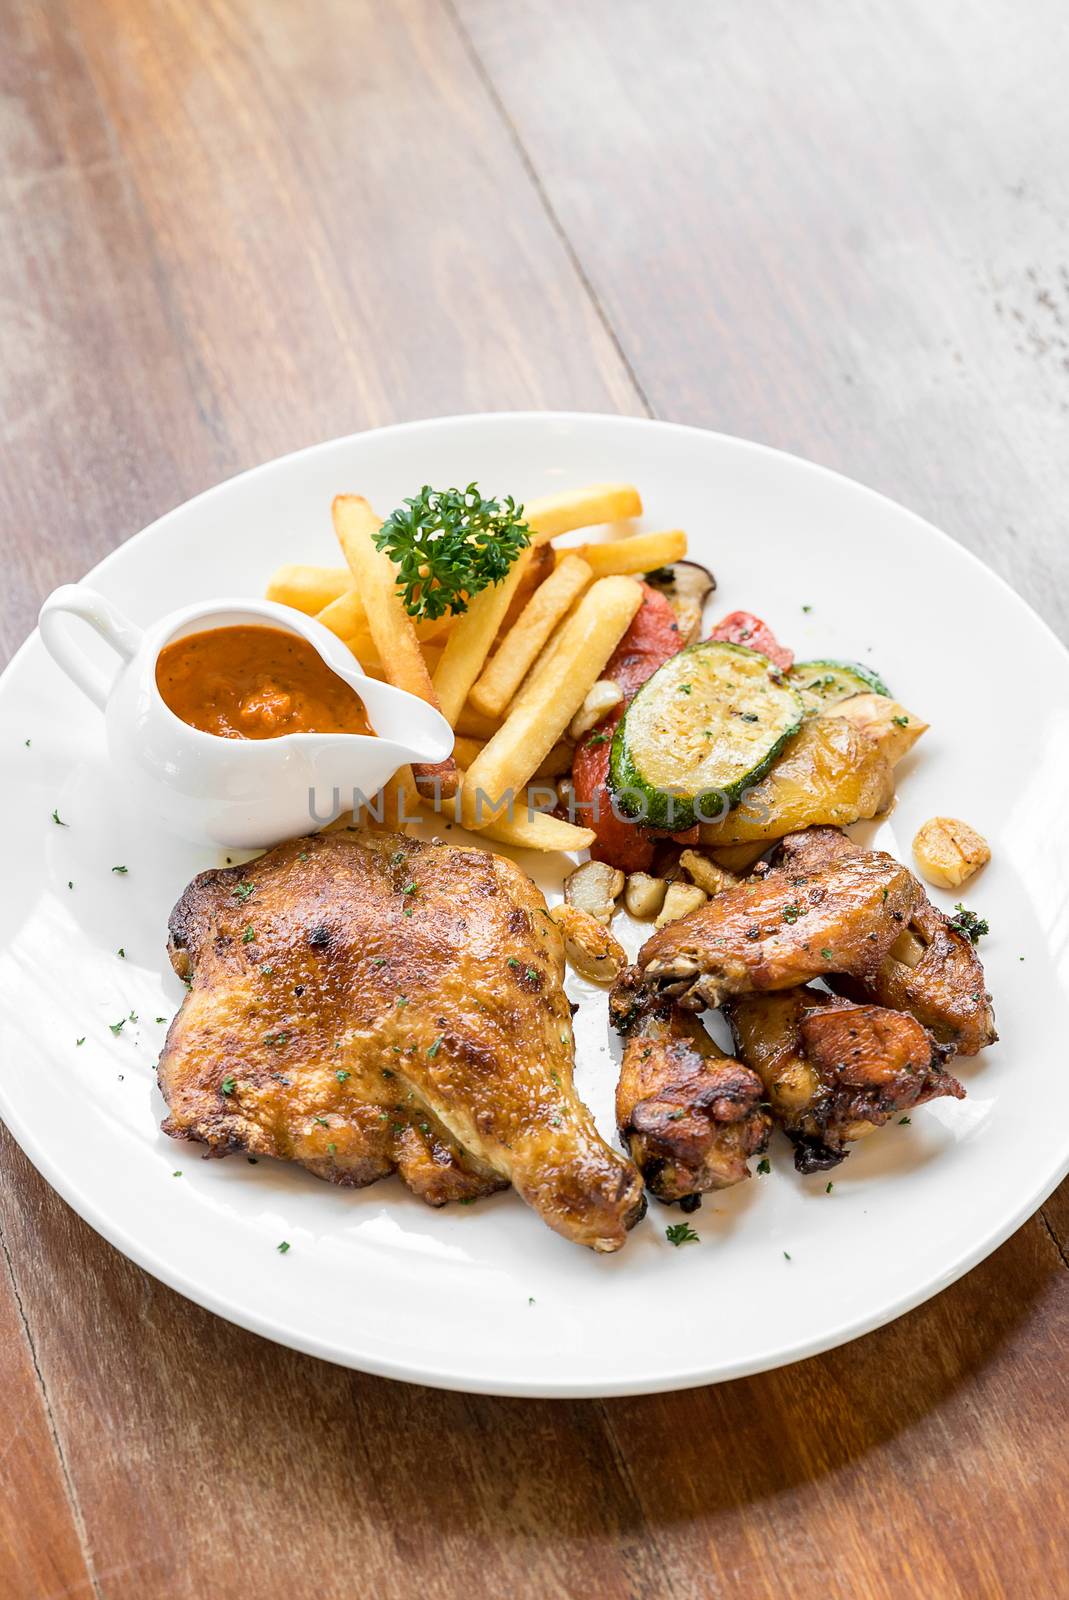 grilled chicken peri peri, BBQ Portuguese groumet griled cuisine, with fries and grilled vegetable.